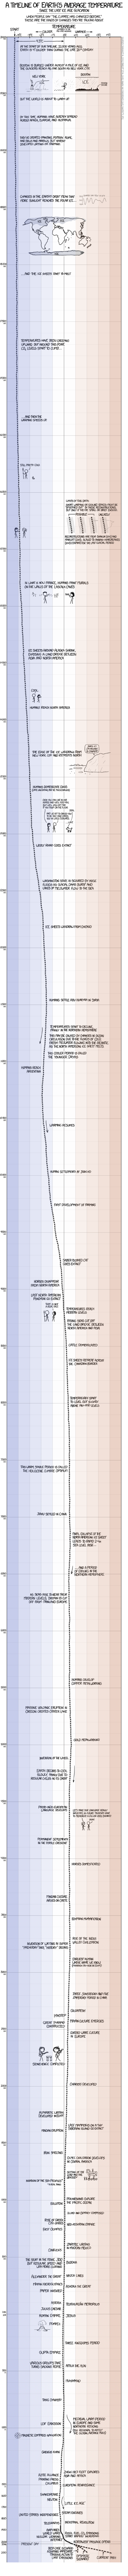 Earth Temperature Timeline meme by XKCD showing a timeline of earth's average temperature from 20 000 BC to today 